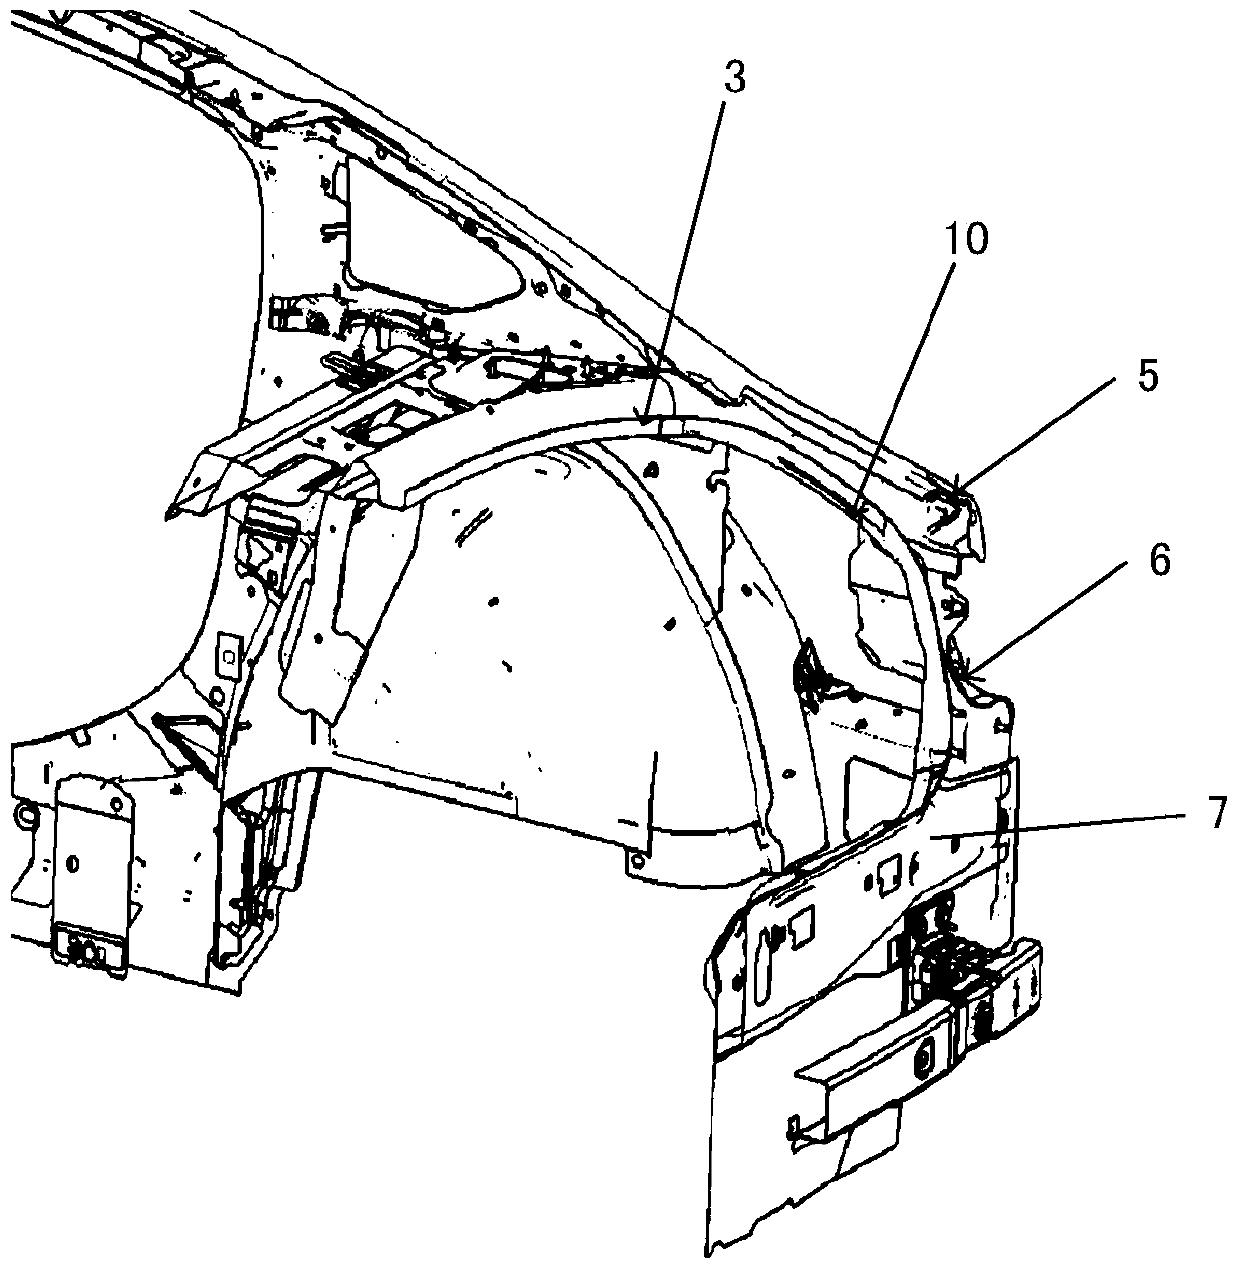 A reinforcement device for a rear body of a vehicle